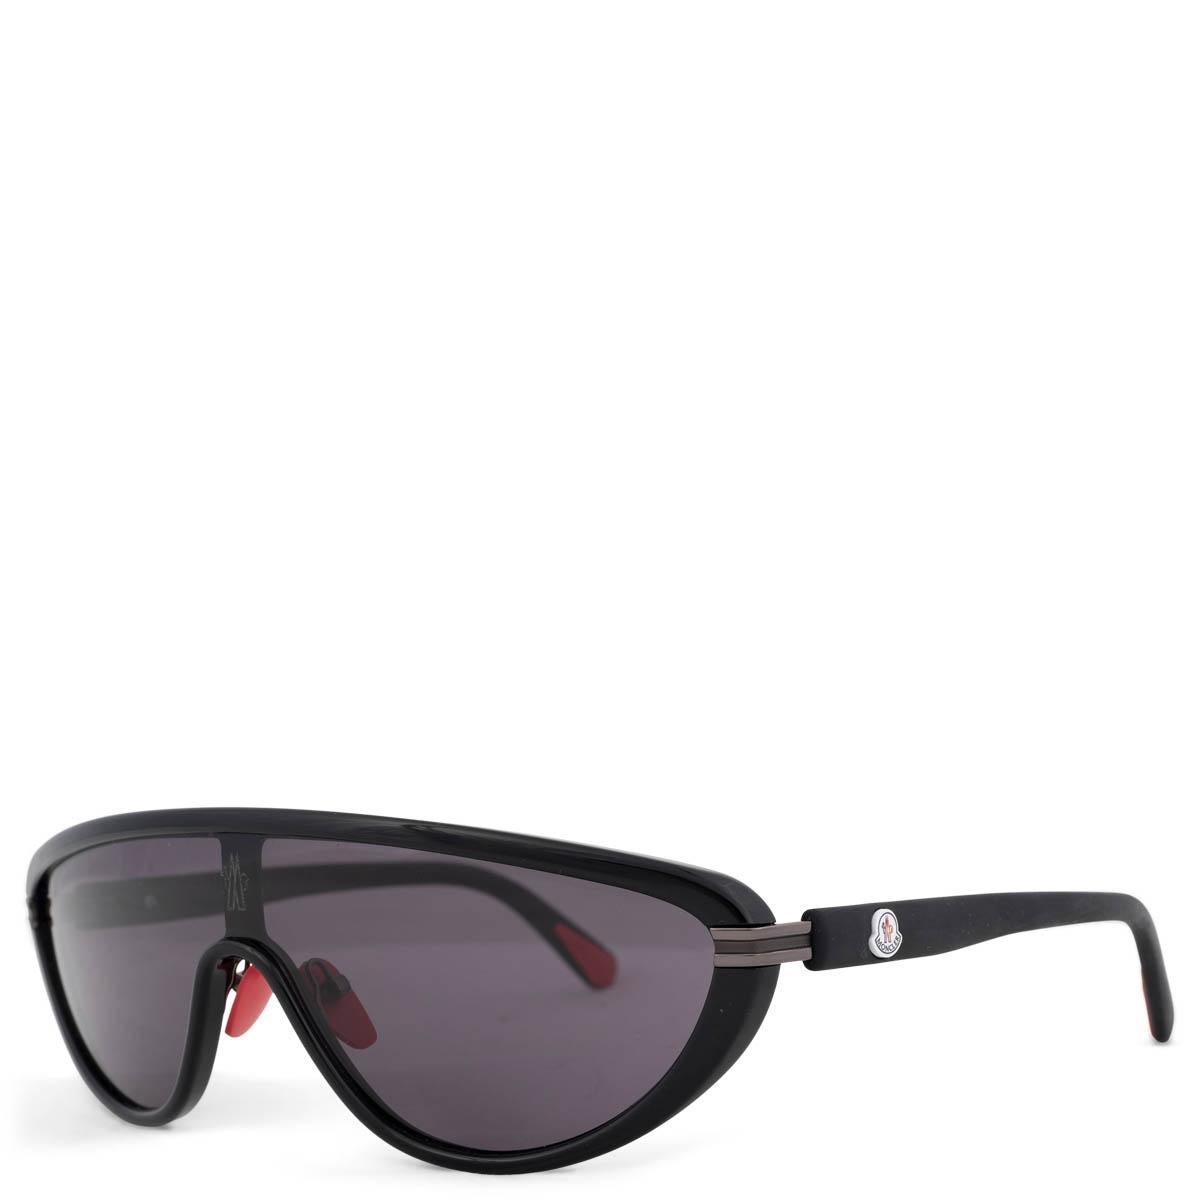 100% authentic Moncler Vitesse shield sunglasses feature a black acetate frame and tonal tinted lenses with red details. Lens are filter category 3. Have been worn and are in excellent condition. They come in a protective case.